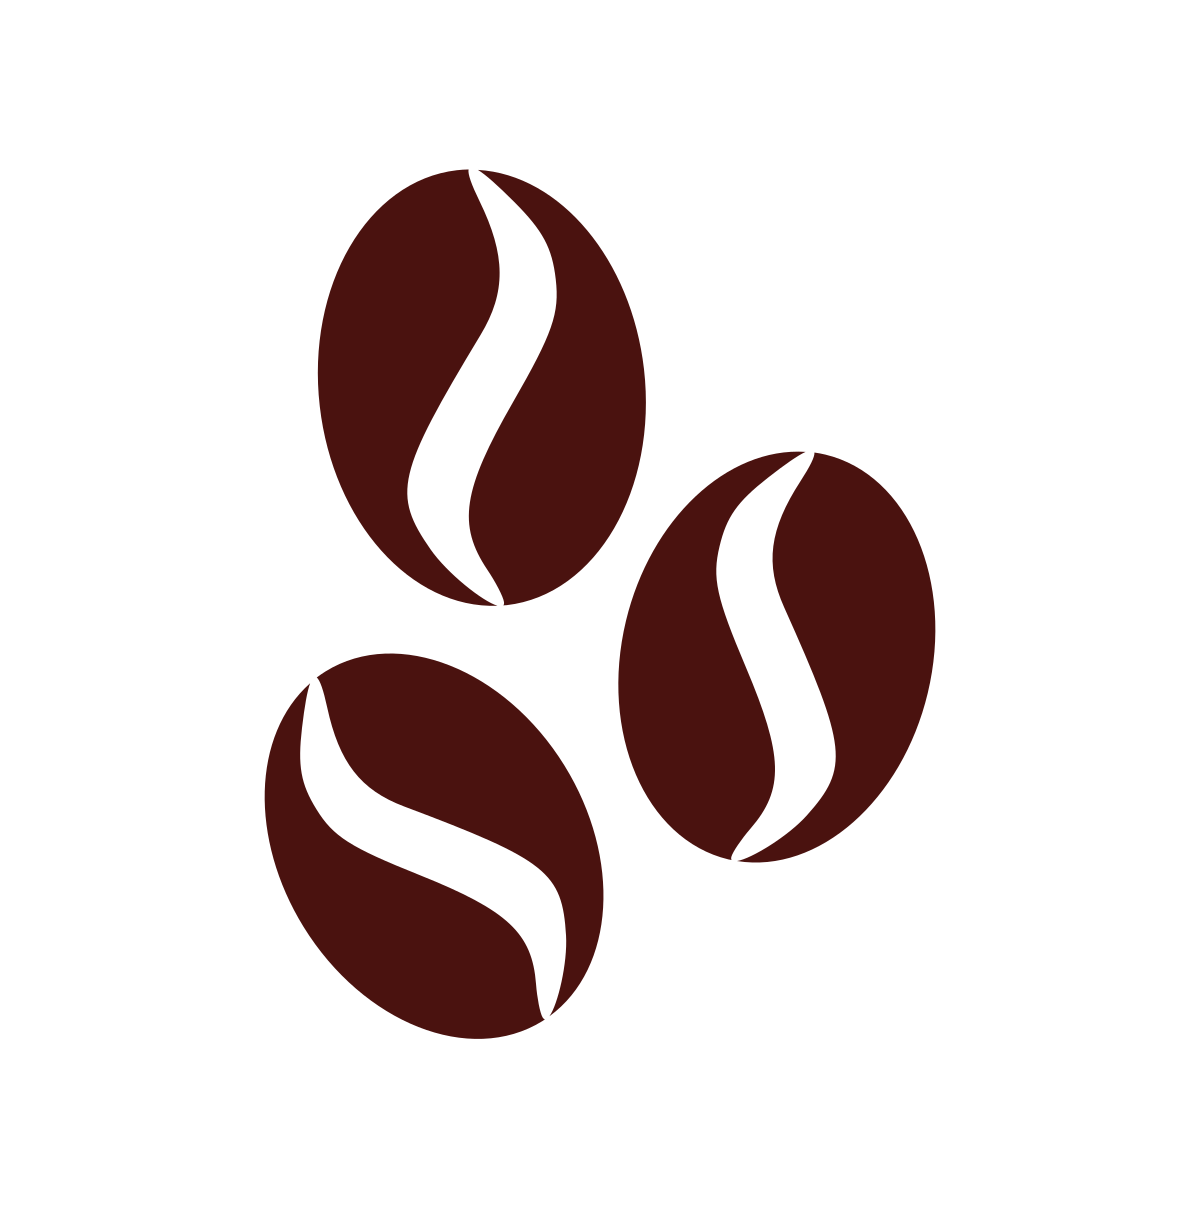 File:Coffee beans by gnokii.svg - Wikimedia Commons